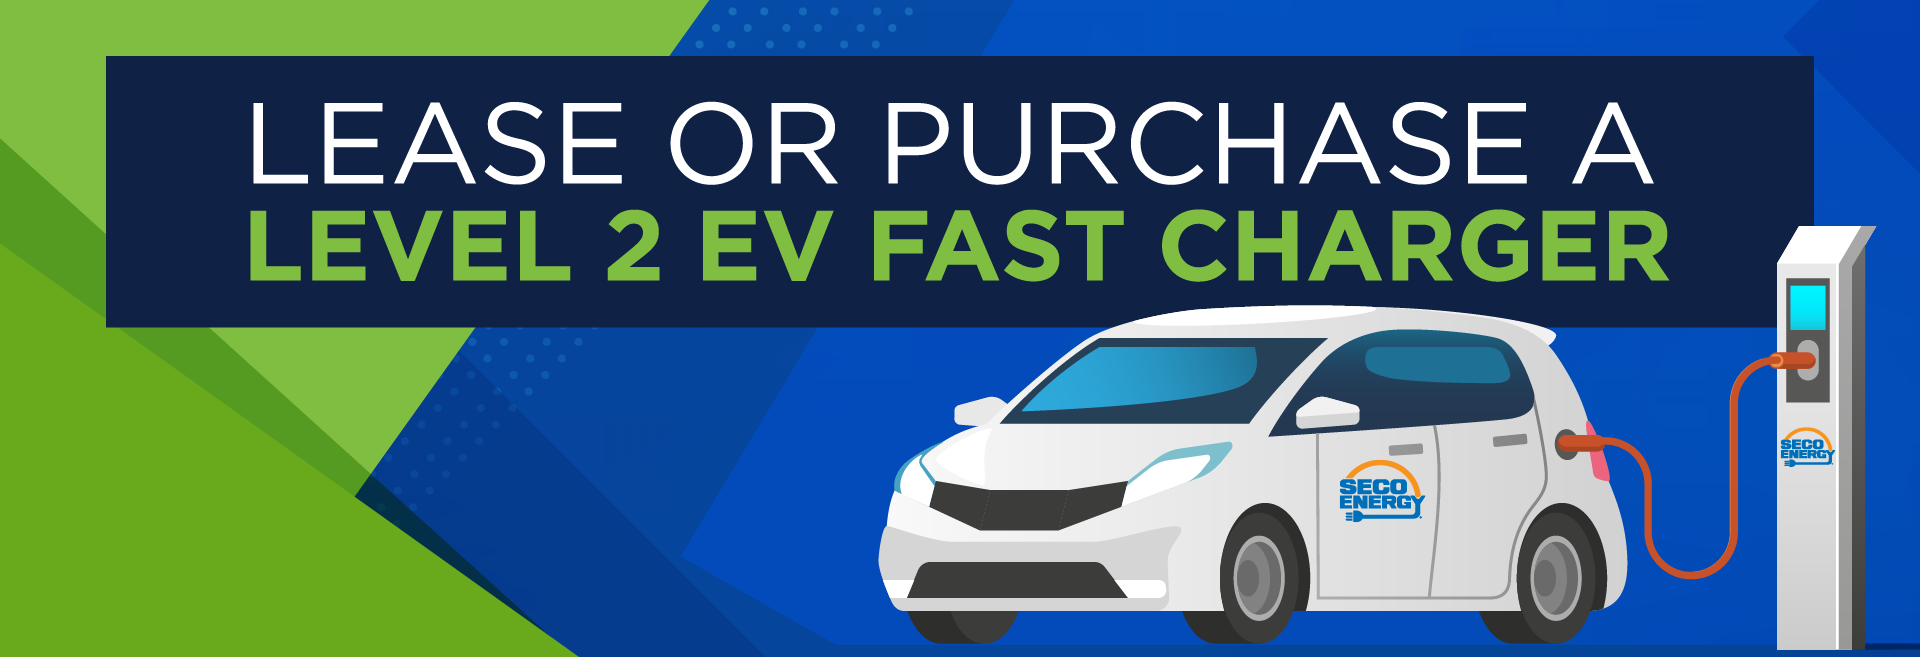 EV charger lease purchase homepage banner